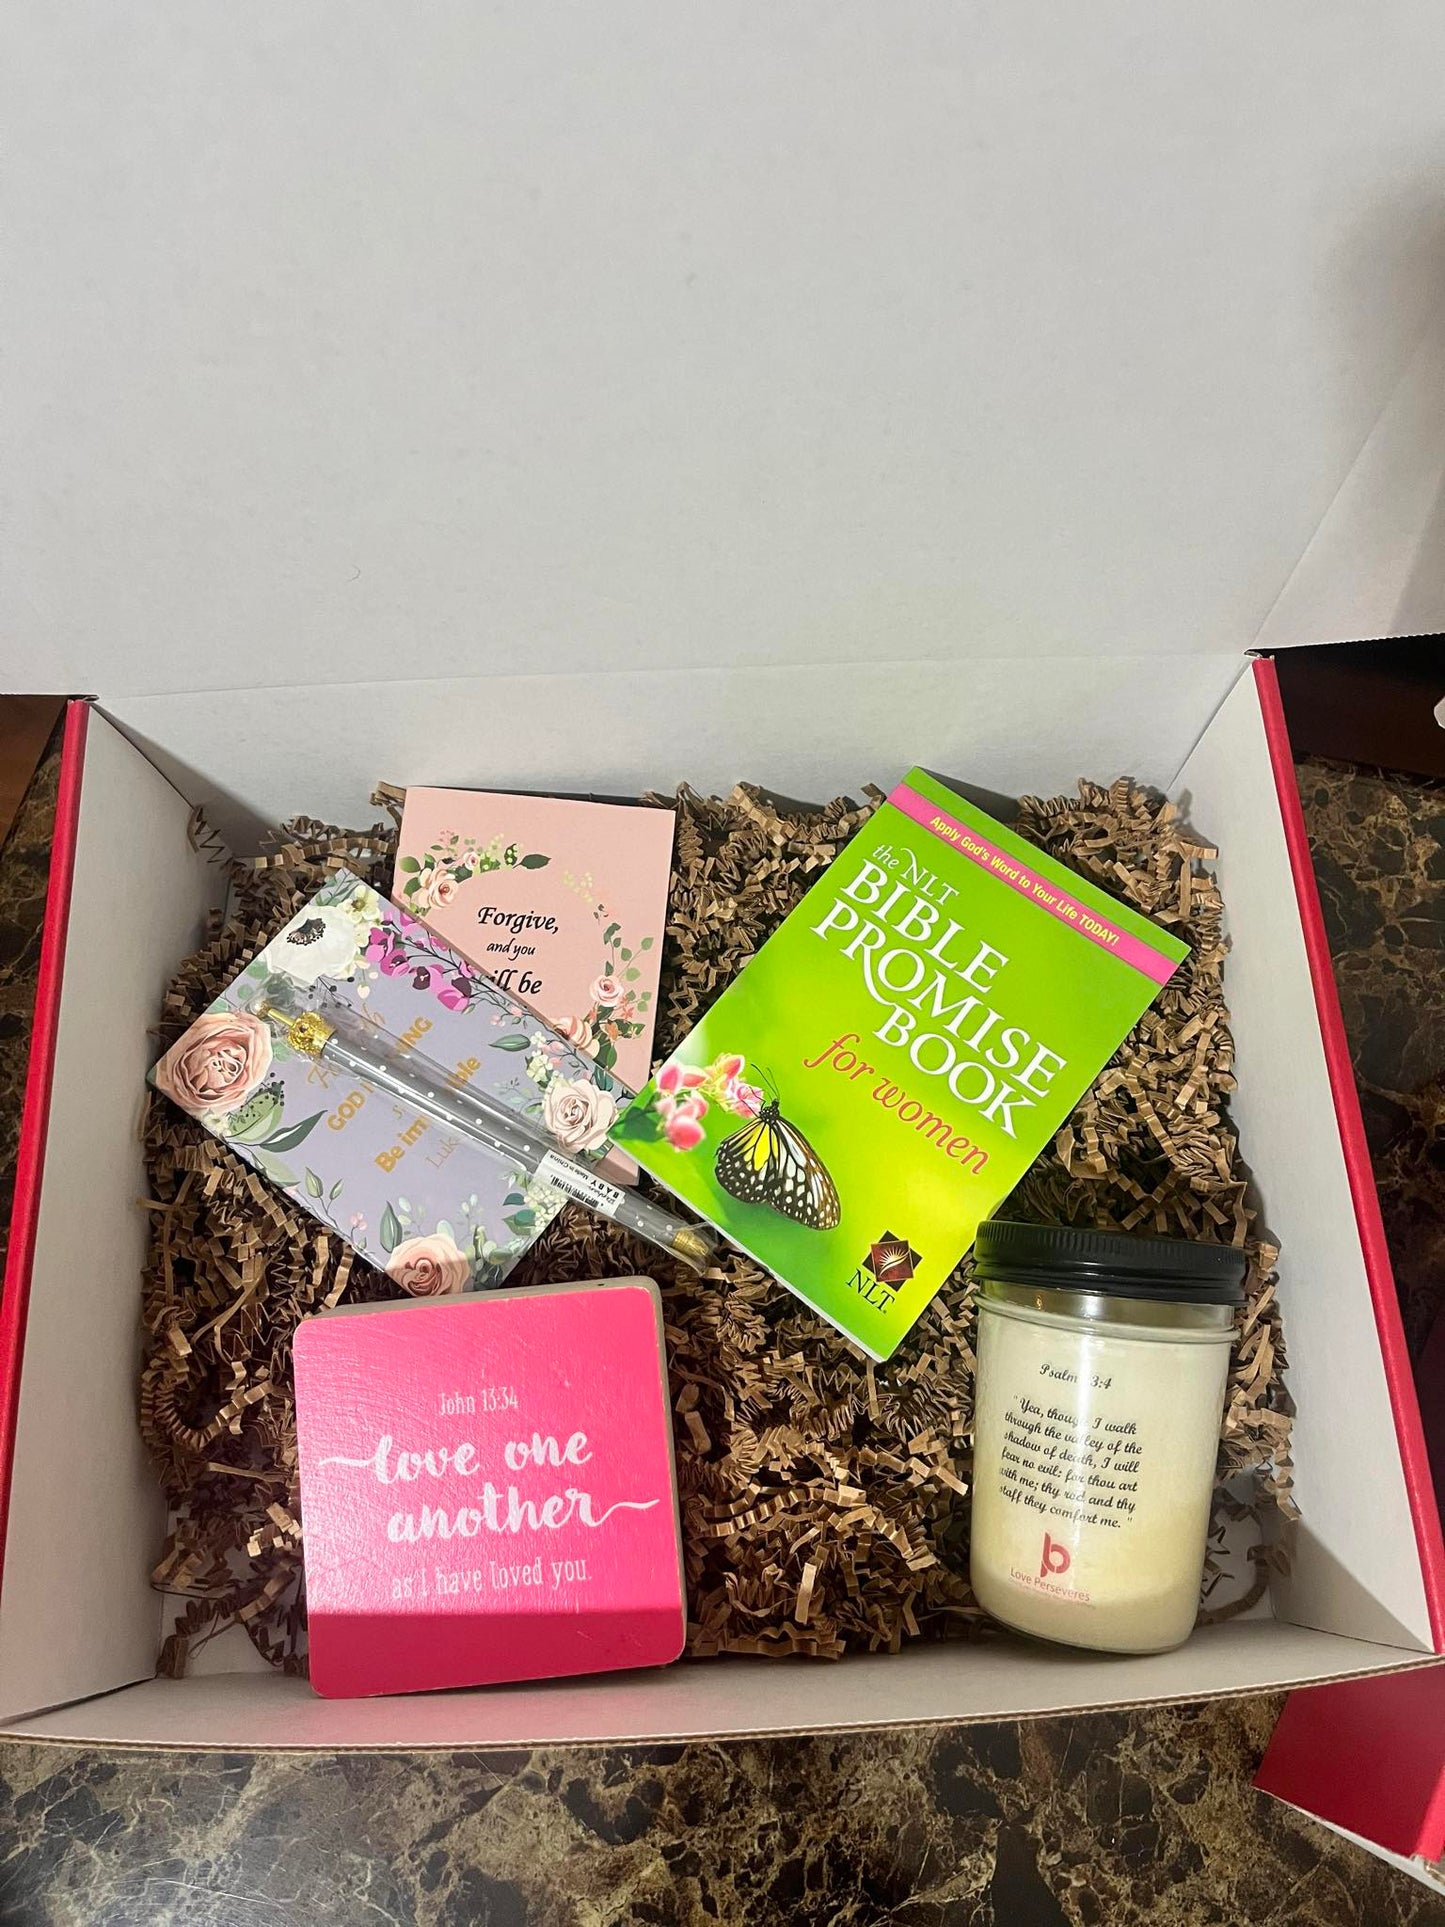 Christmas Edition Self Care & Encouragement In a Box As a Gift